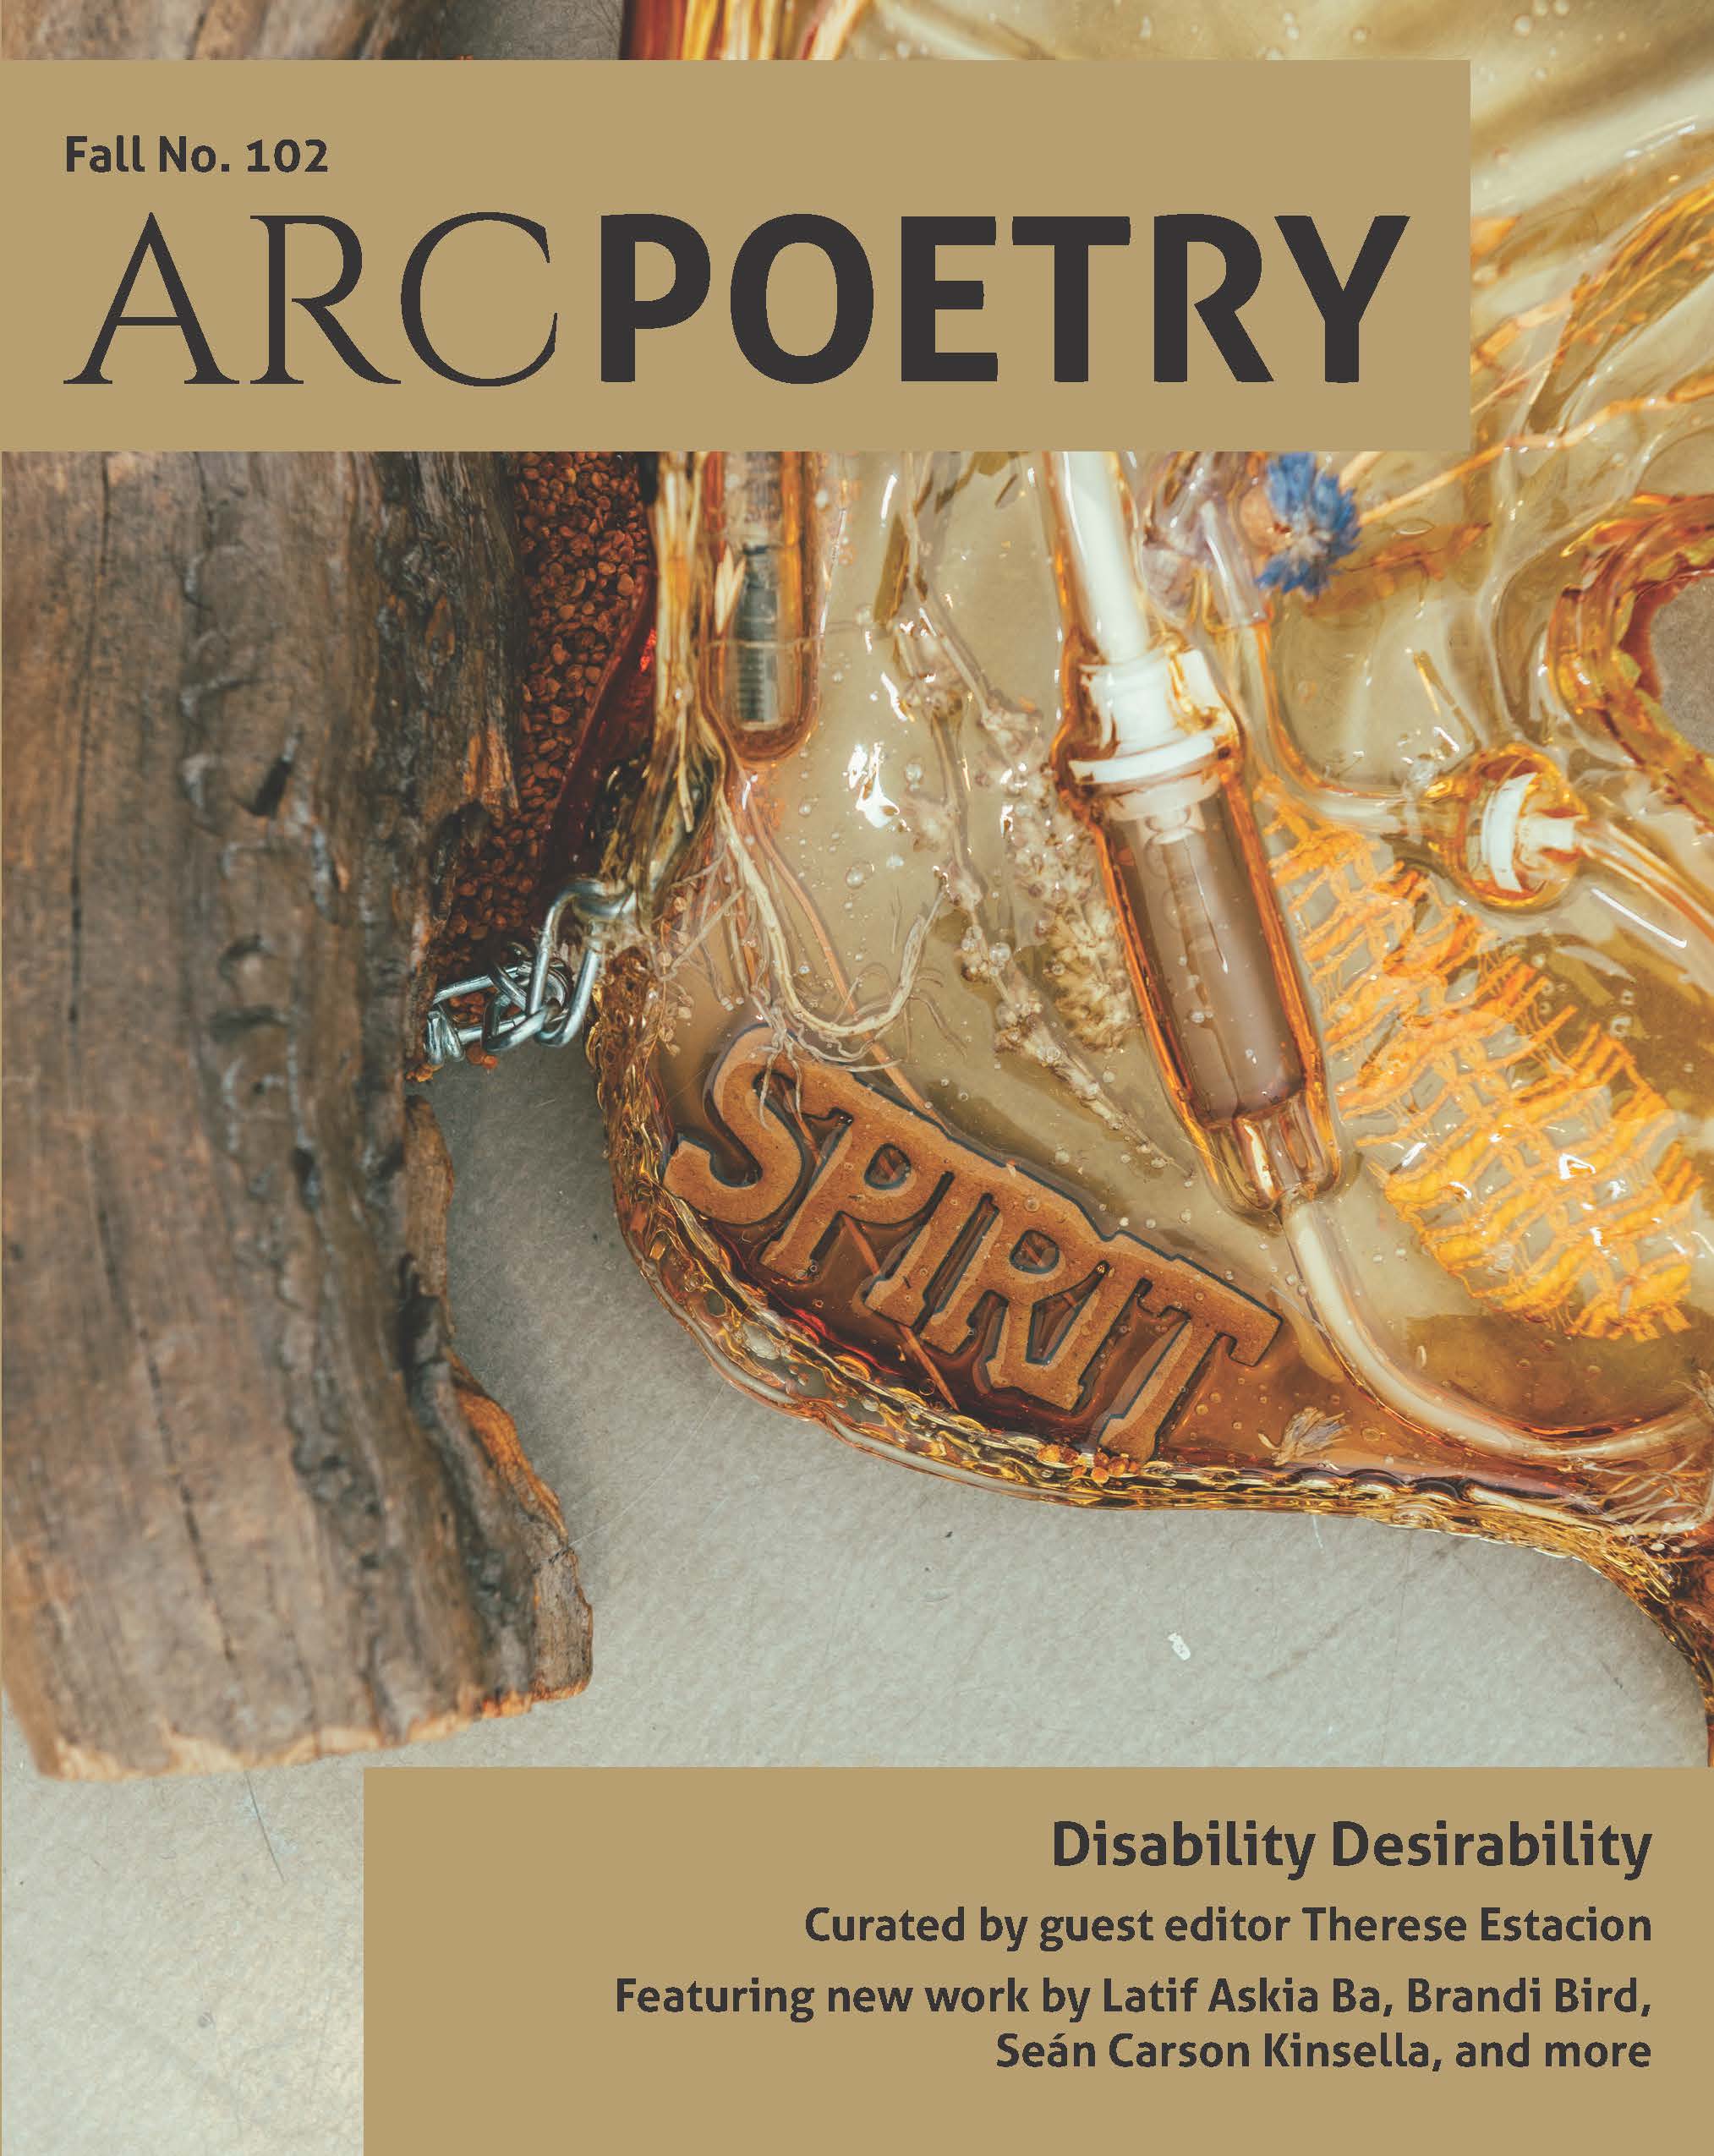 The cover of Arc #102, featuring a detail of a sculpture by Sharona Franklin. The text on the cover reads: "Disability Desirability Curated by guest editor Therese Estacion. Featuring new work by Latif Askia Ba, Brandi Bird, Seán Carson Kinsella, and more"